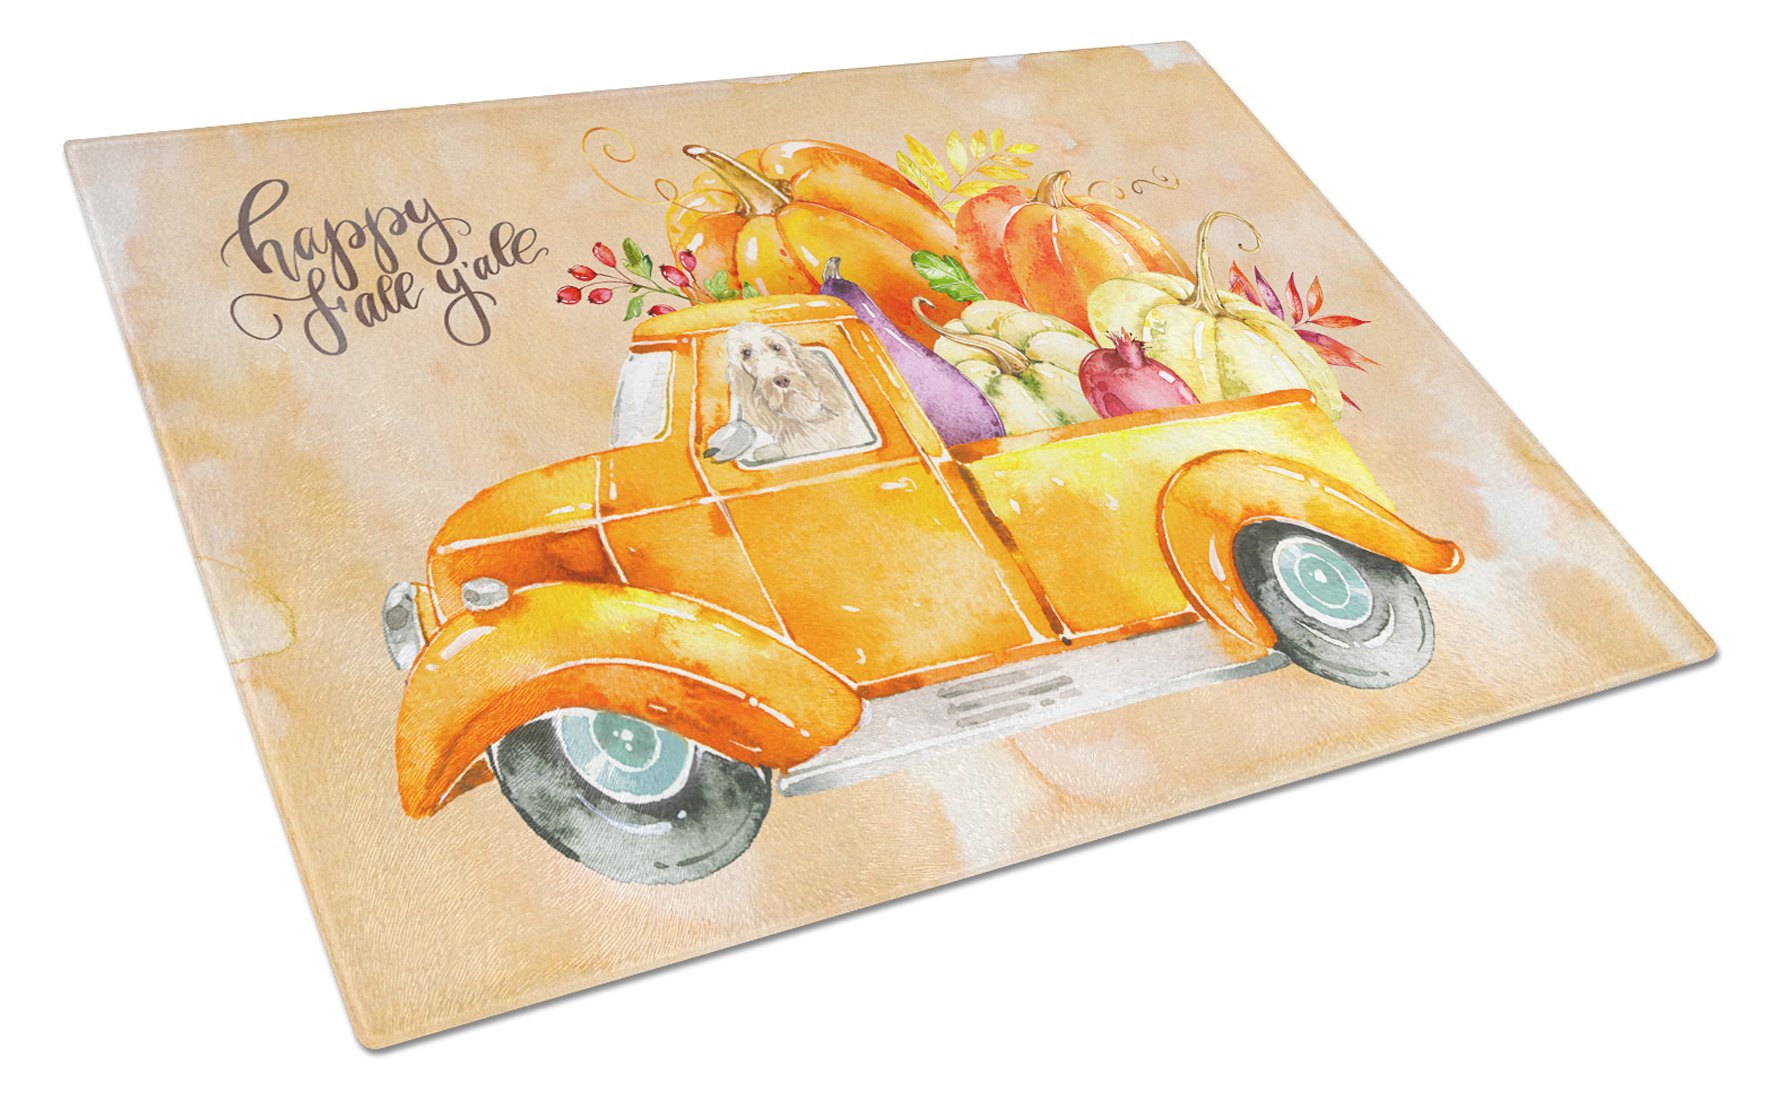 Fall Harvest Spinone Italiano Glass Cutting Board Large CK2637LCB by Caroline's Treasures